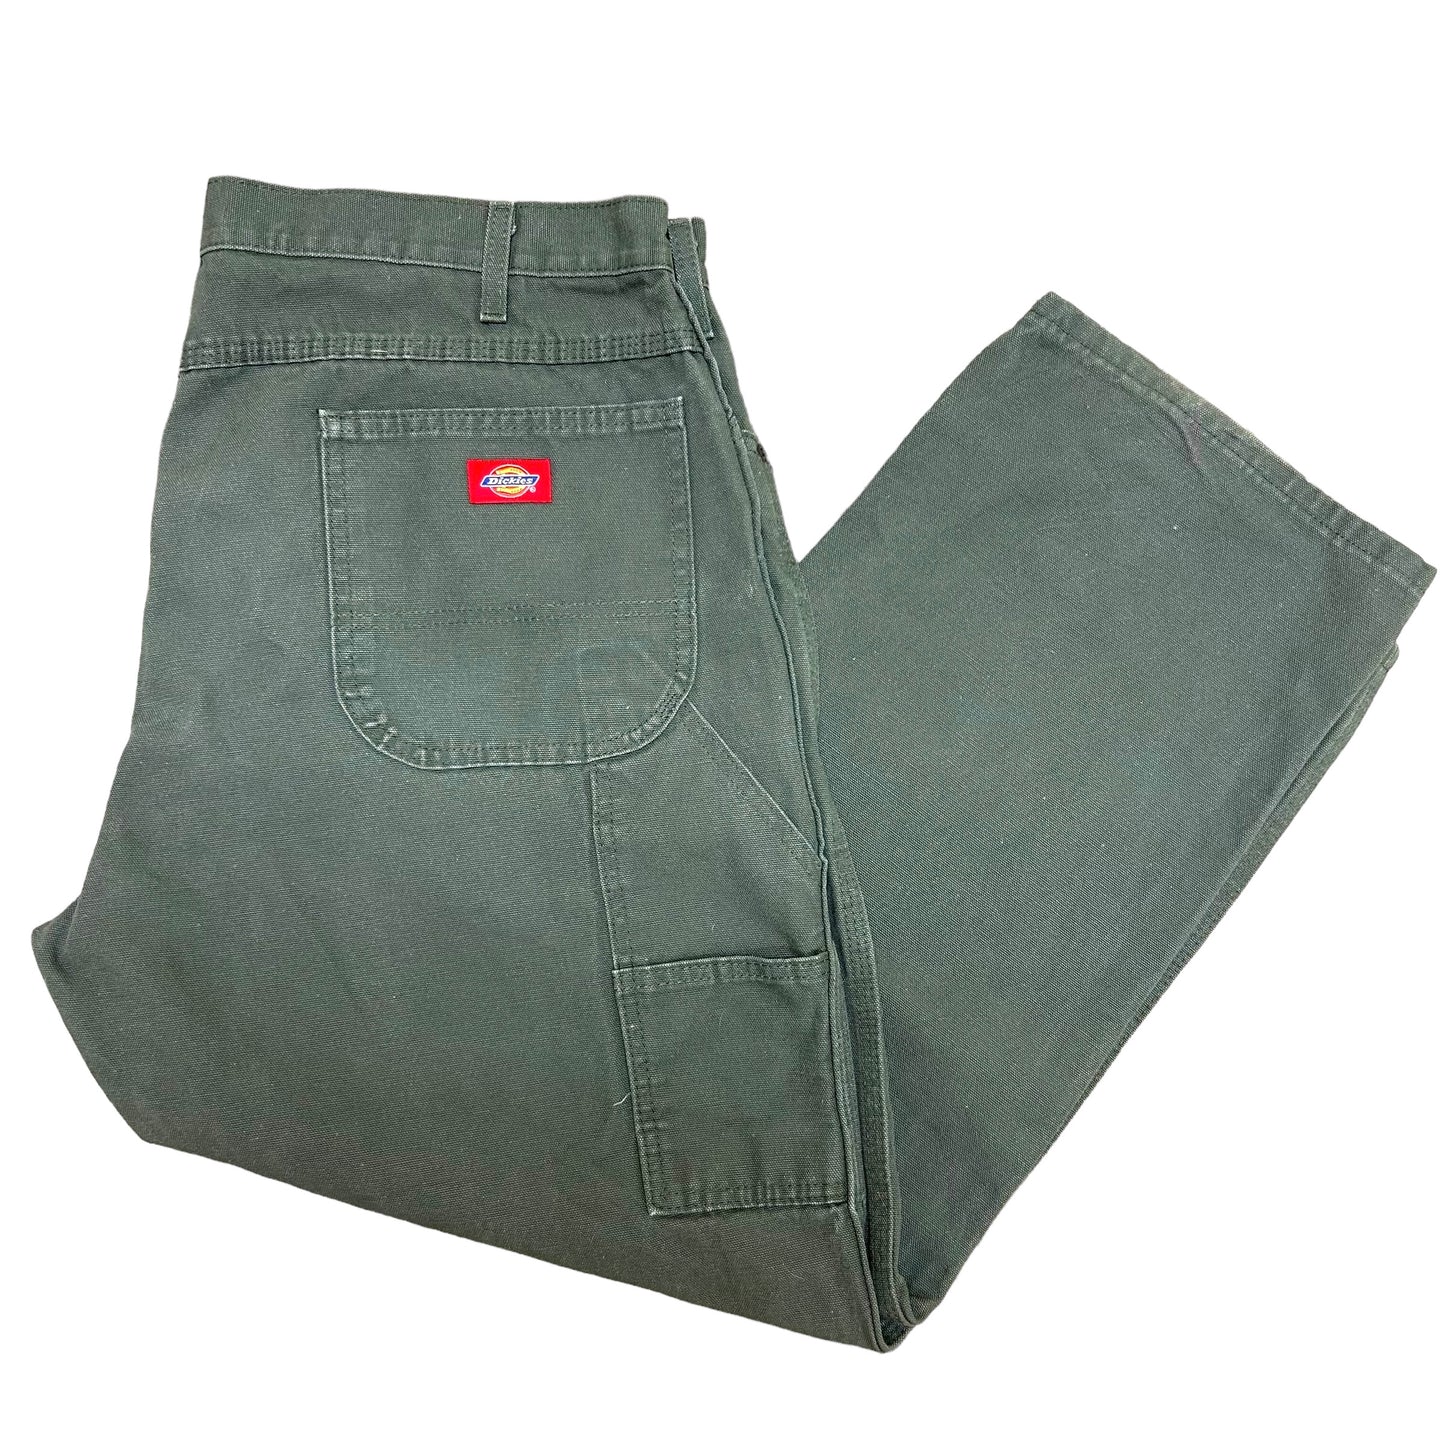 Early 2000s Dickies Green Canvas Carpenter Pants - Size 40” x 30”